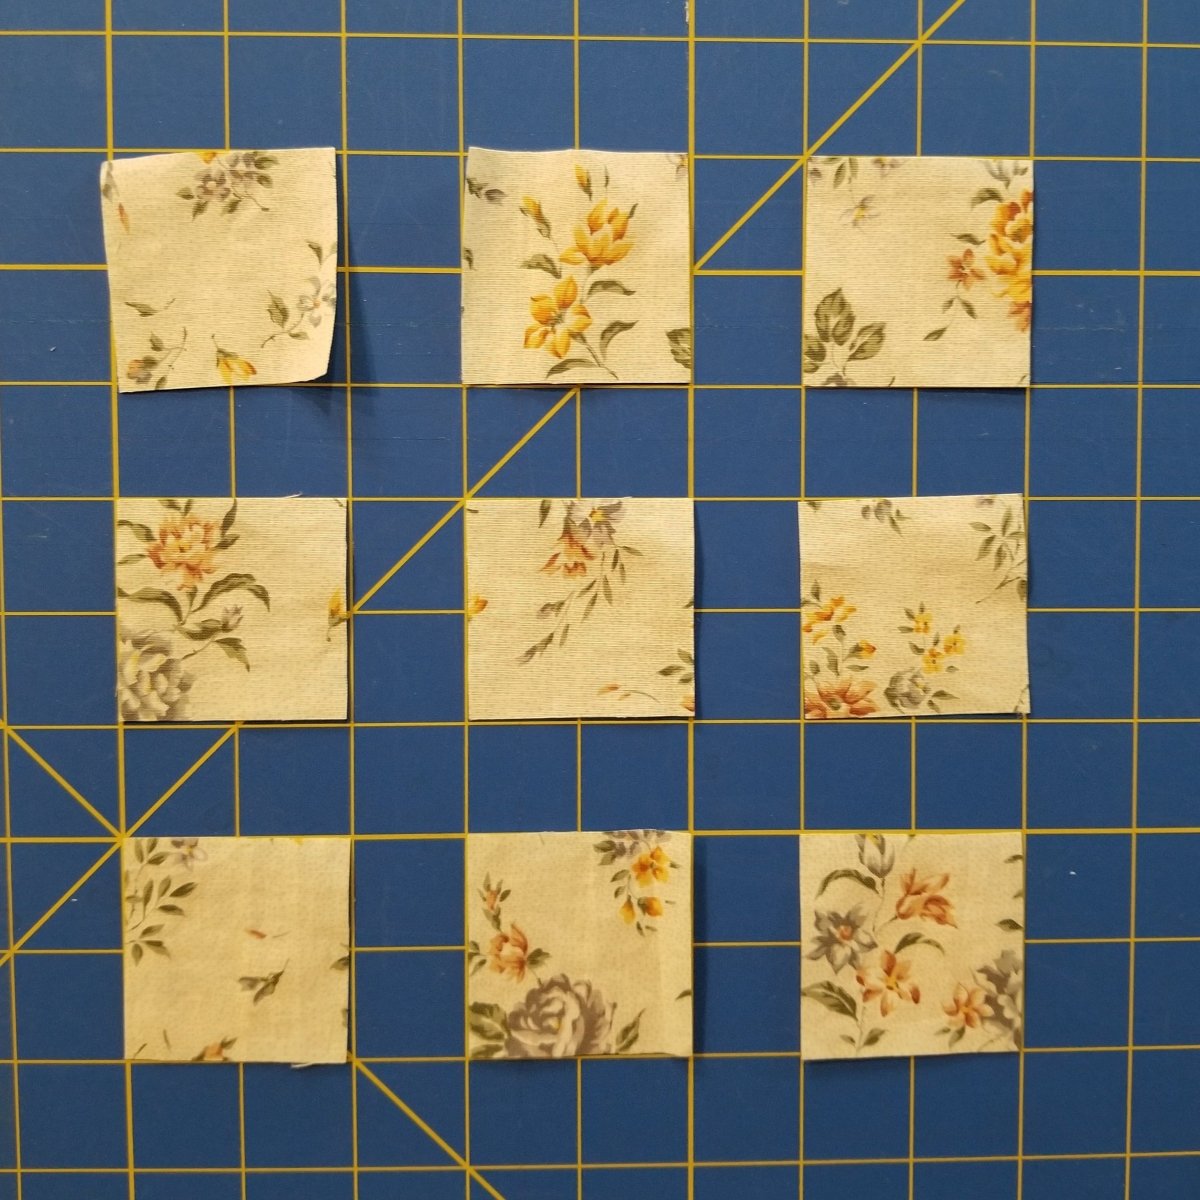 Fabric squares cut with the Creative Shape Cut Ruler